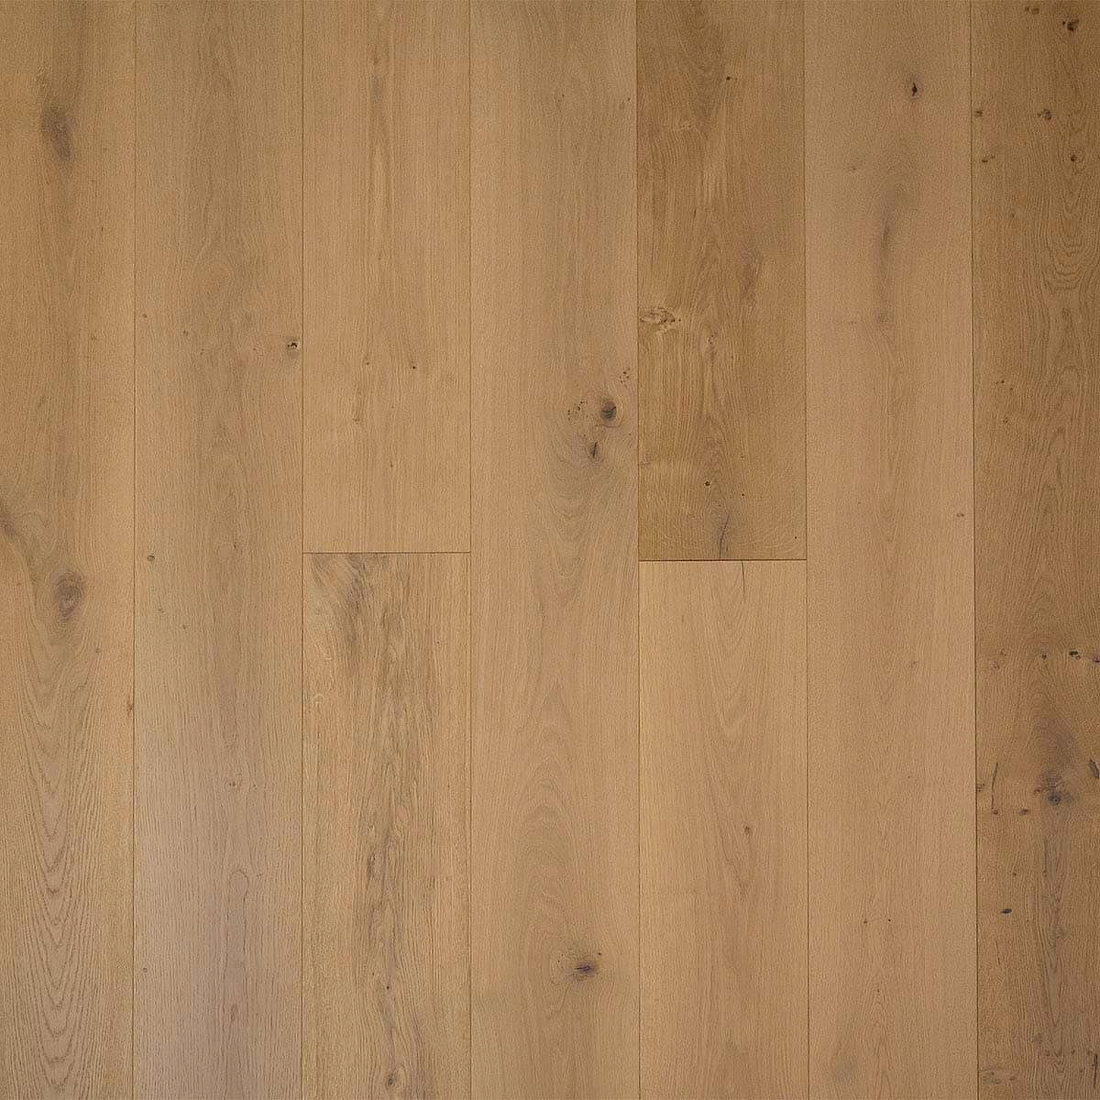 Hyperion Tiles Engineered Flooring 190 x 1900 x 14mm 2.166m2 per pack DC203 White Smoked Oak